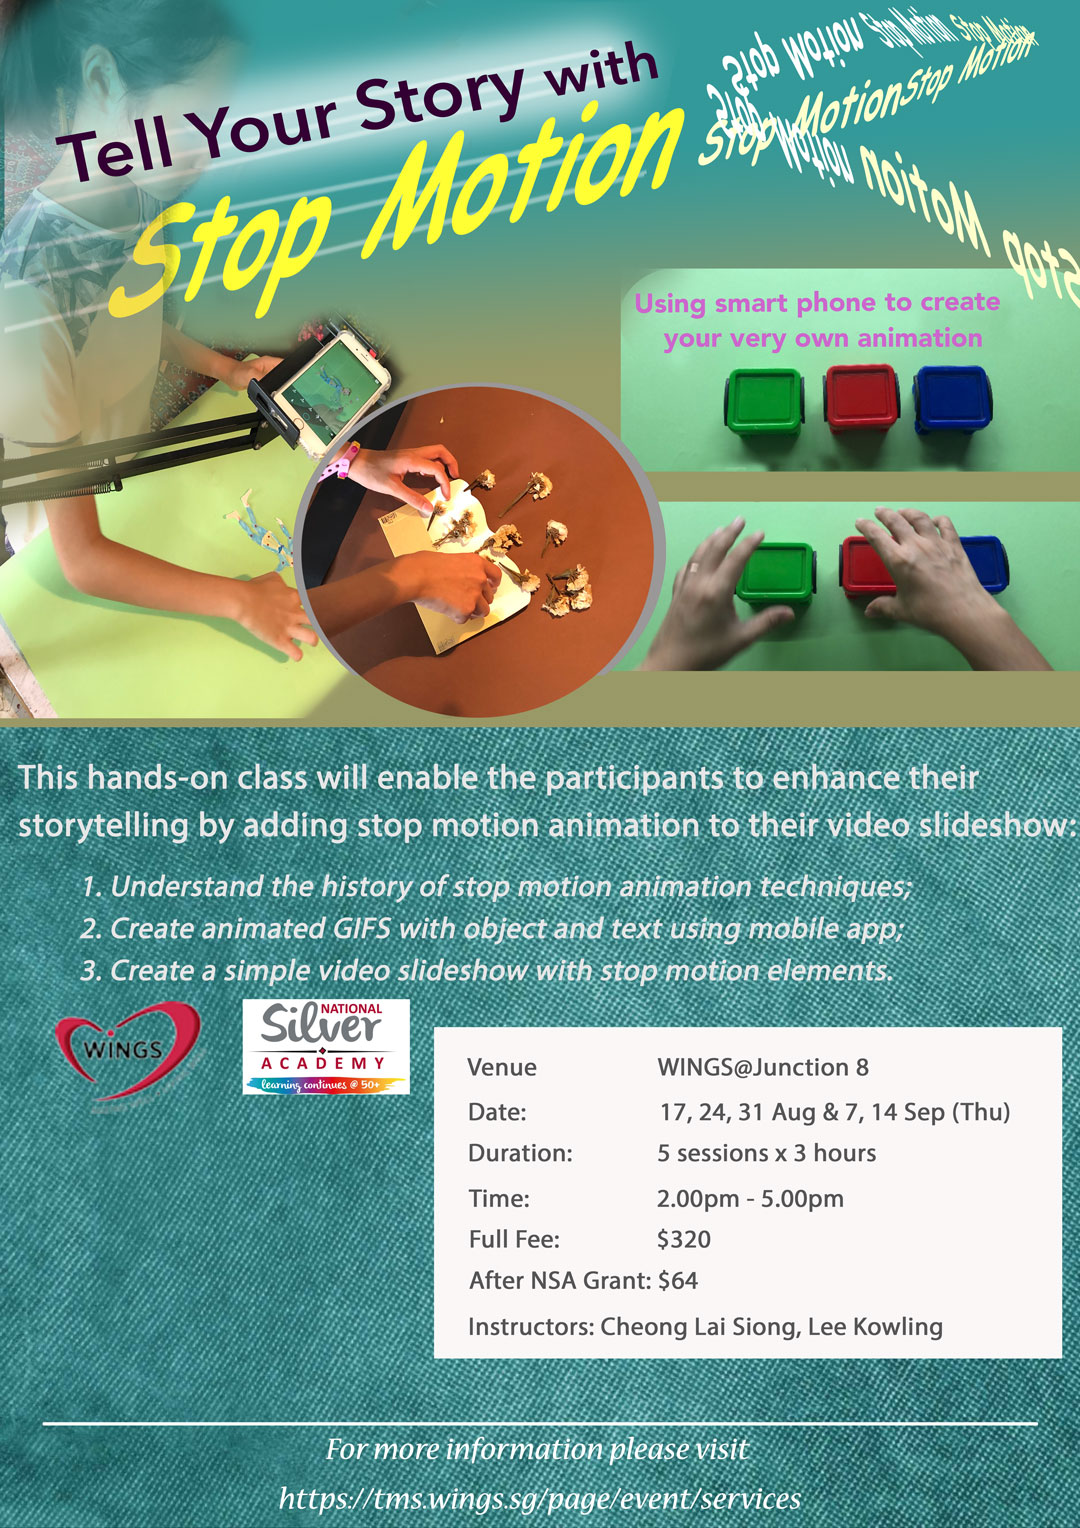 Tell Your Story with Stop Motion at WINGS